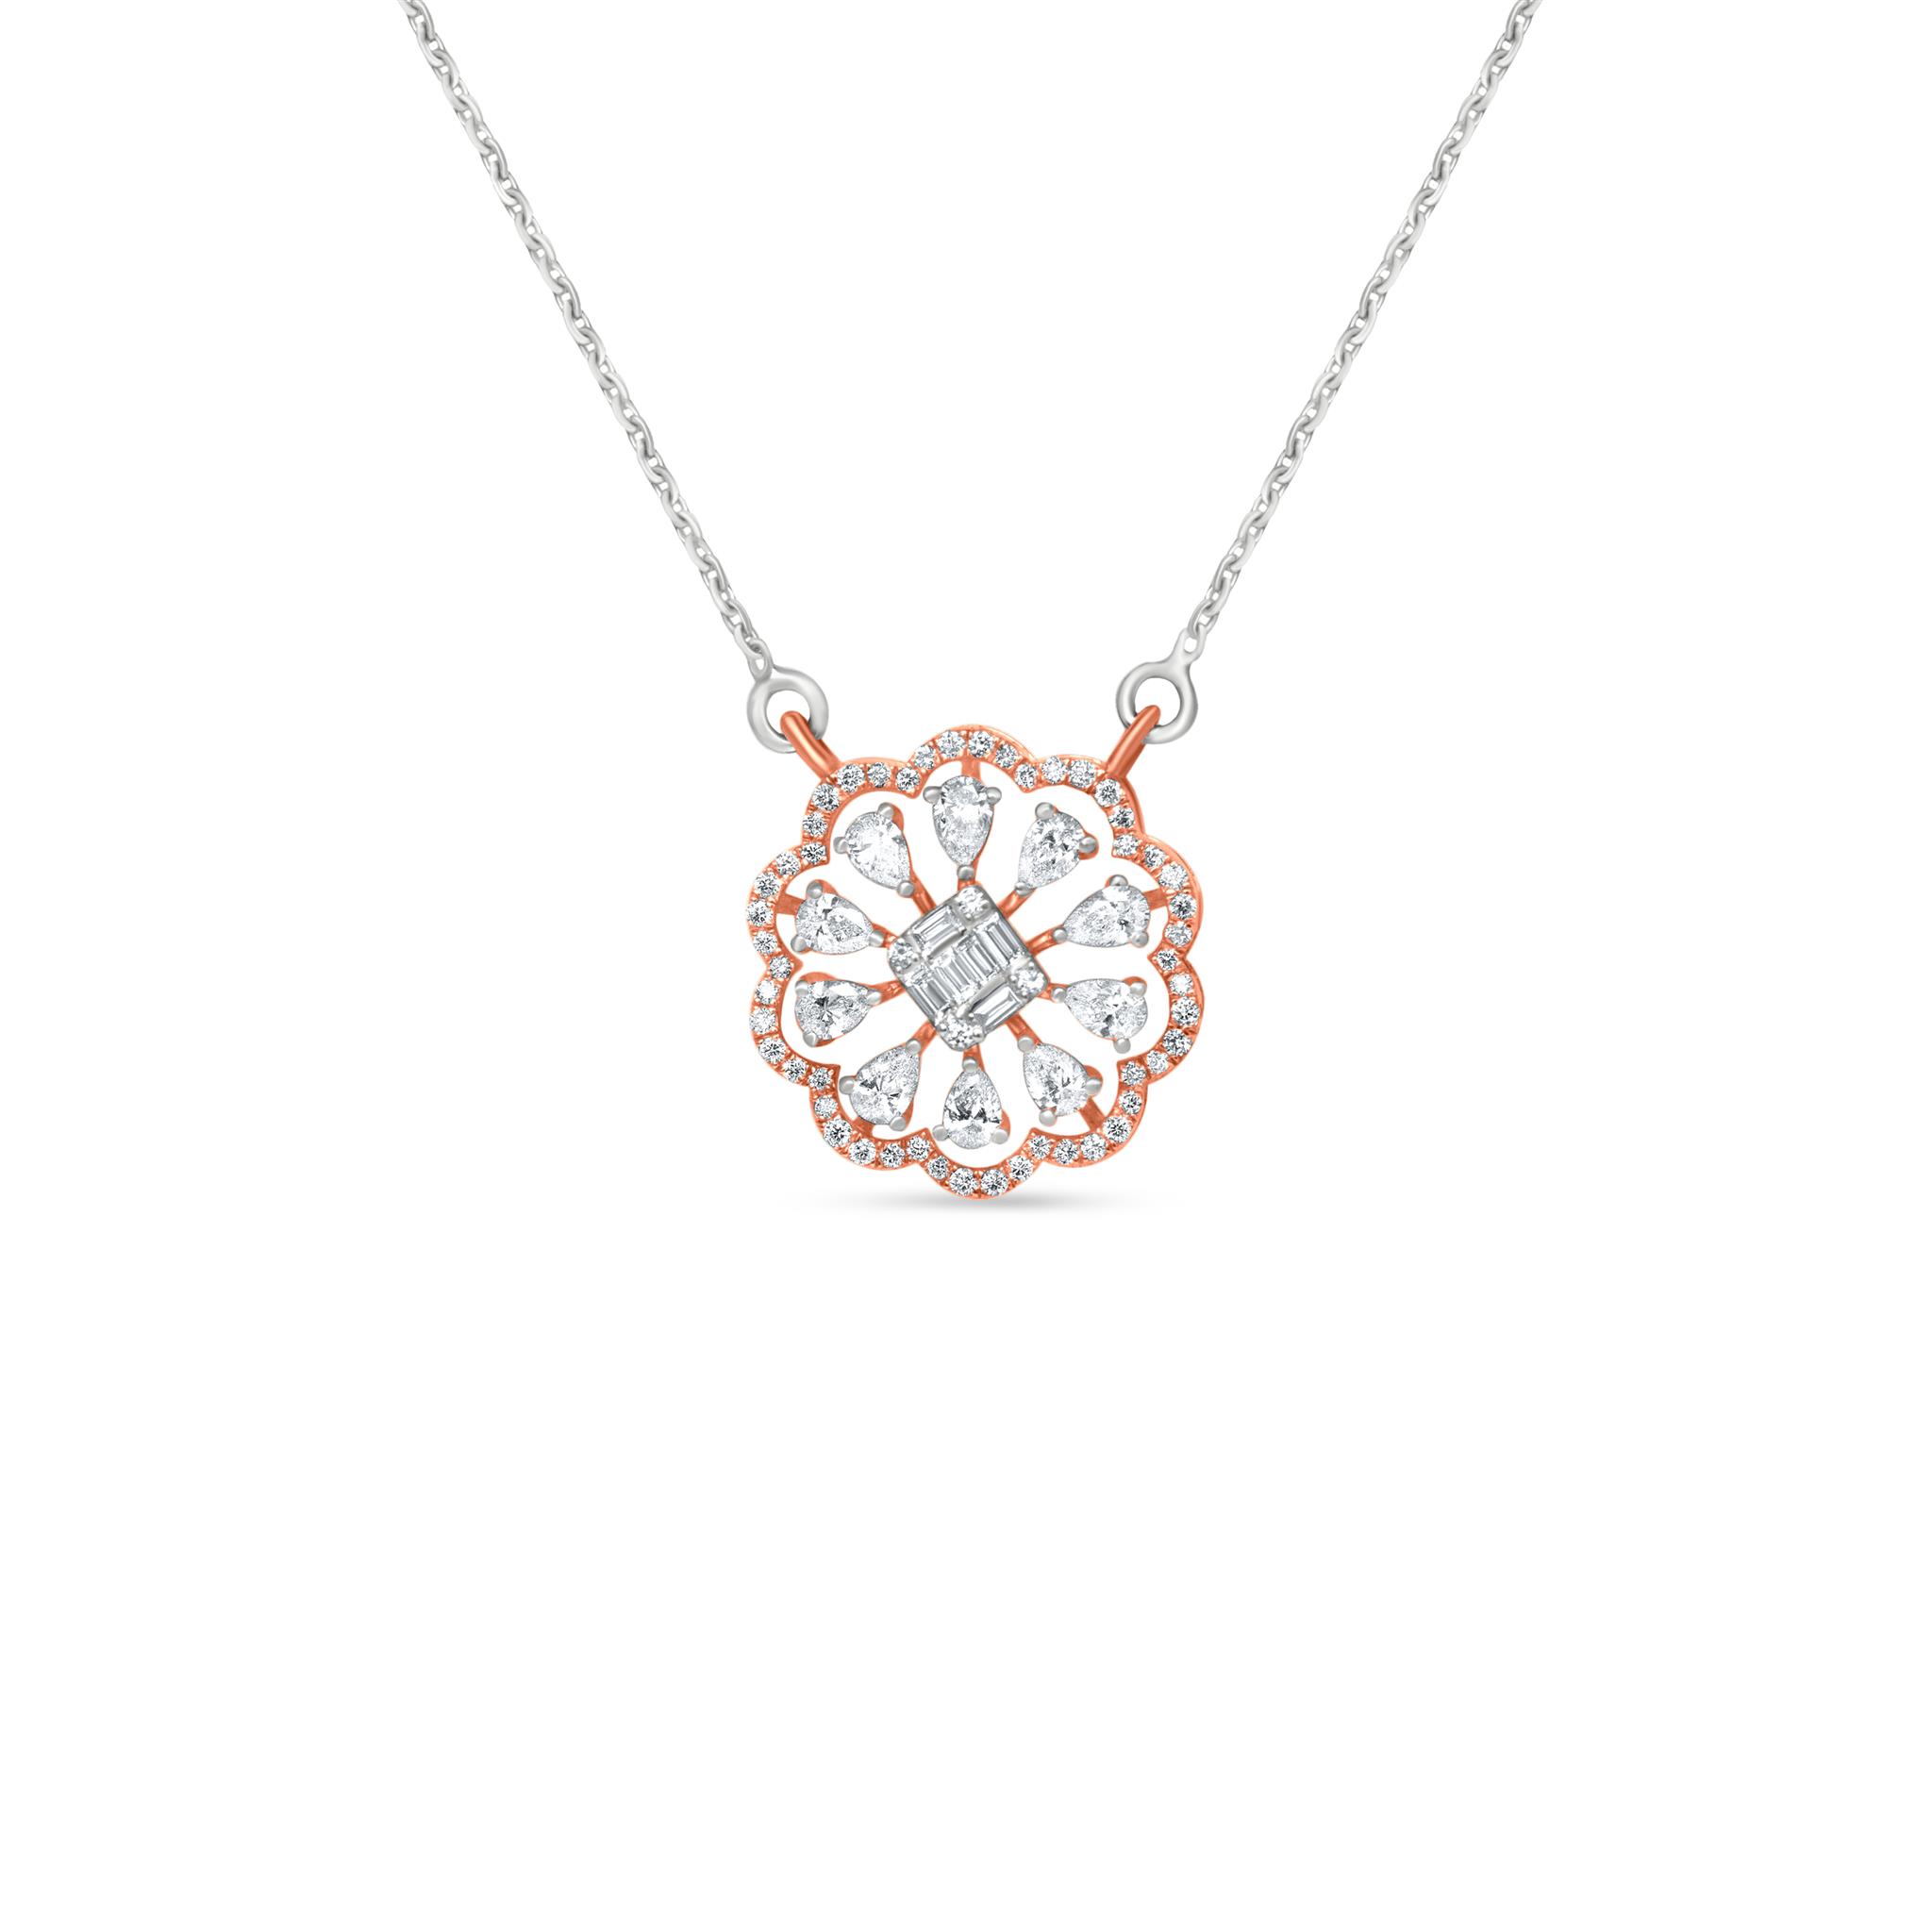 Buy quality Dual Solitaire Look Eva Cut Diamond Pendant with Chain in Pune